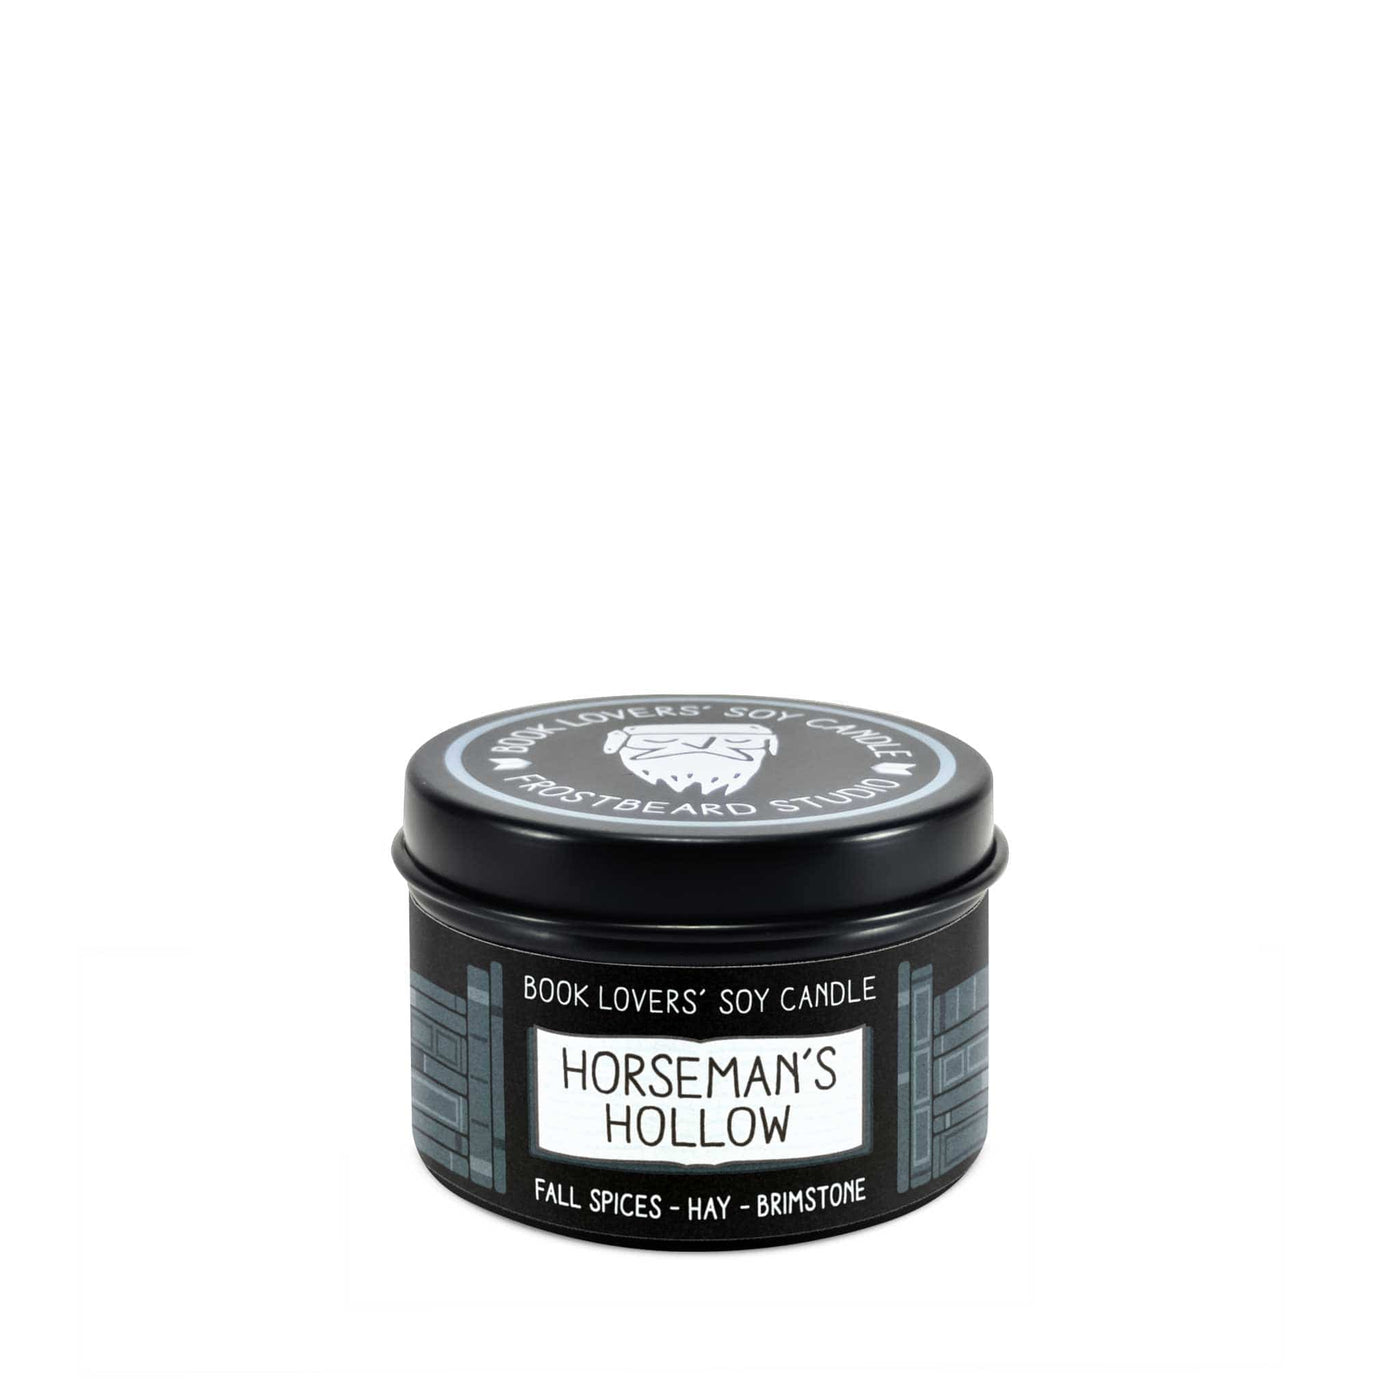 Horseman's Hollow - 2 oz Tin - Book Lovers' Soy Candle - Frostbeard Studio